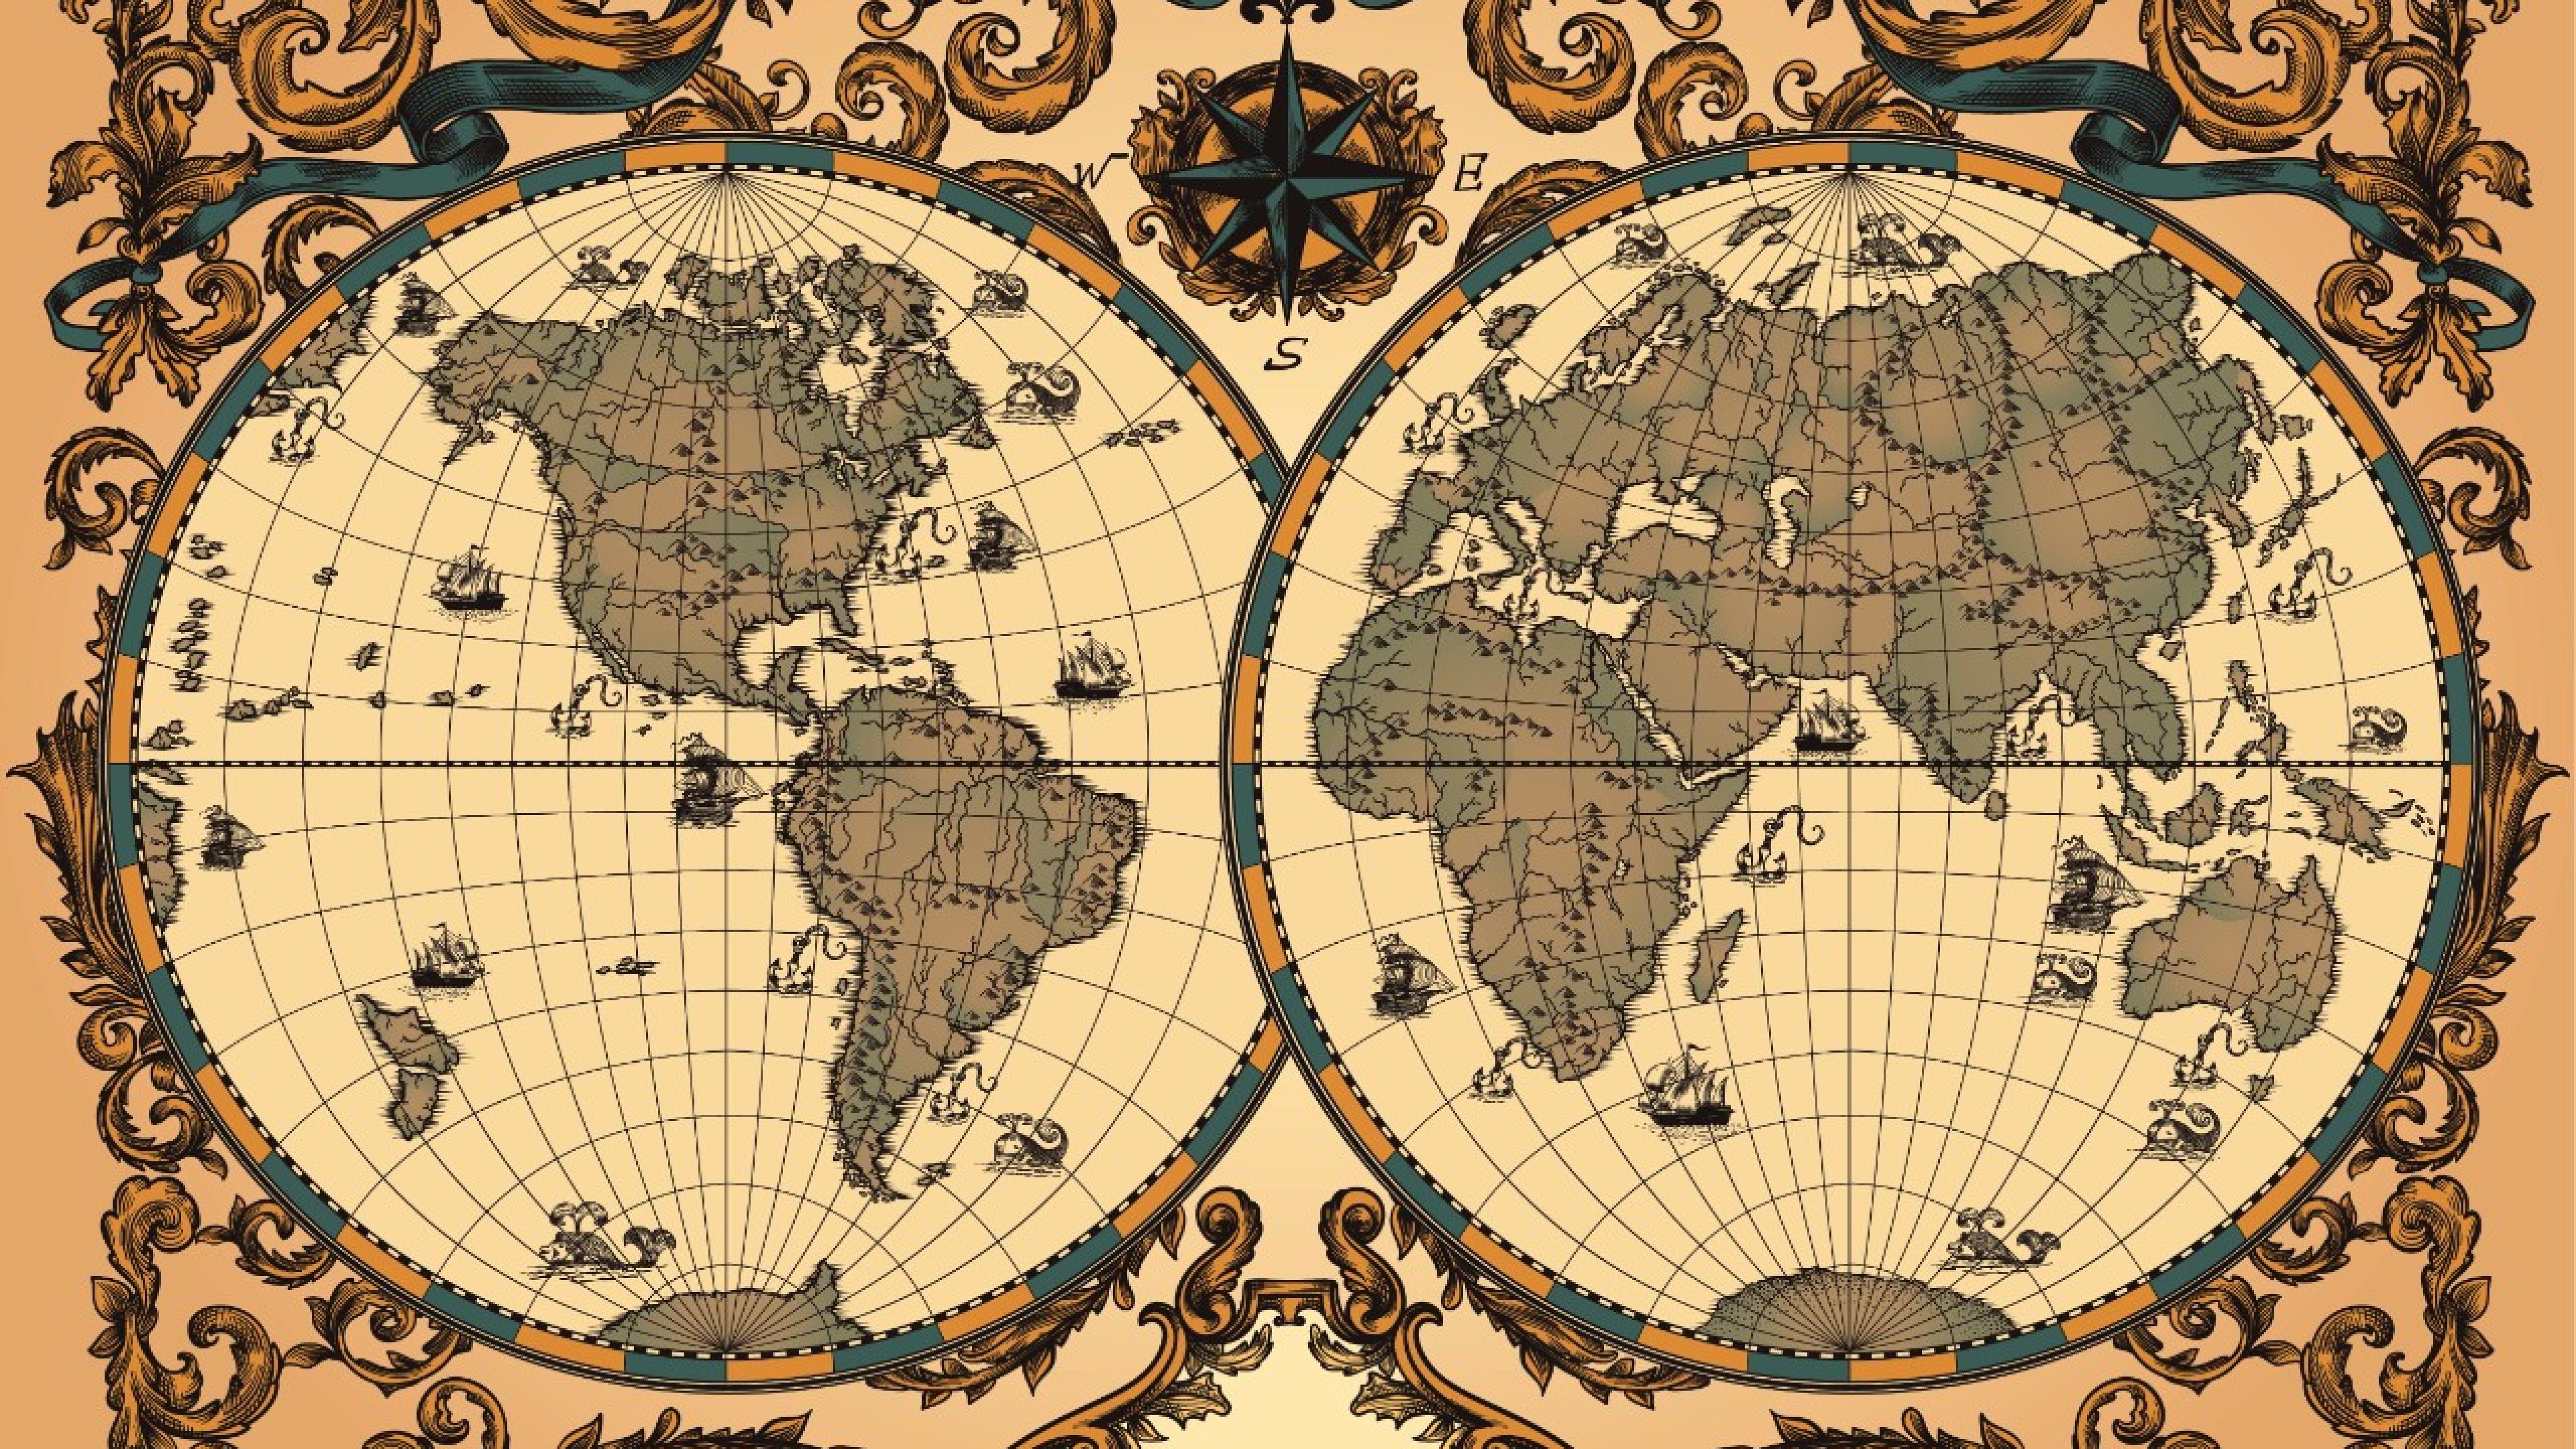 "Antique world map in vector, decorated with patterns and old nautical symbols."